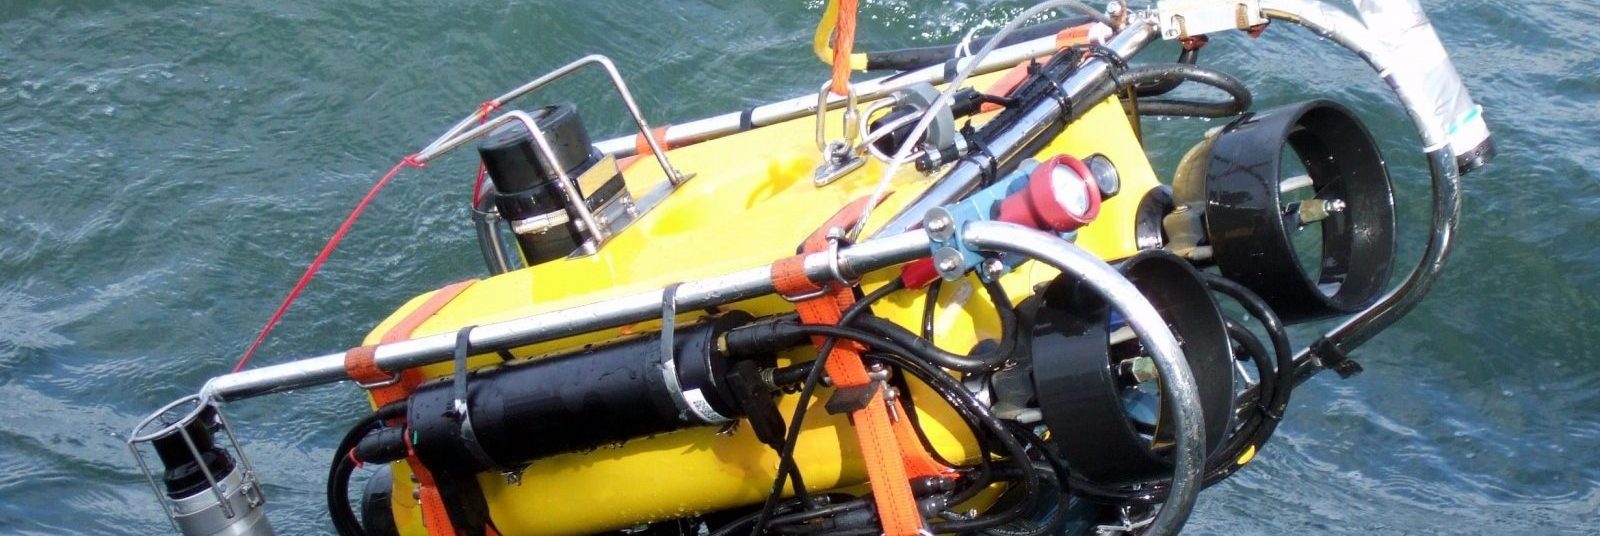 acoustic positioning navigation ROV AUV beacons